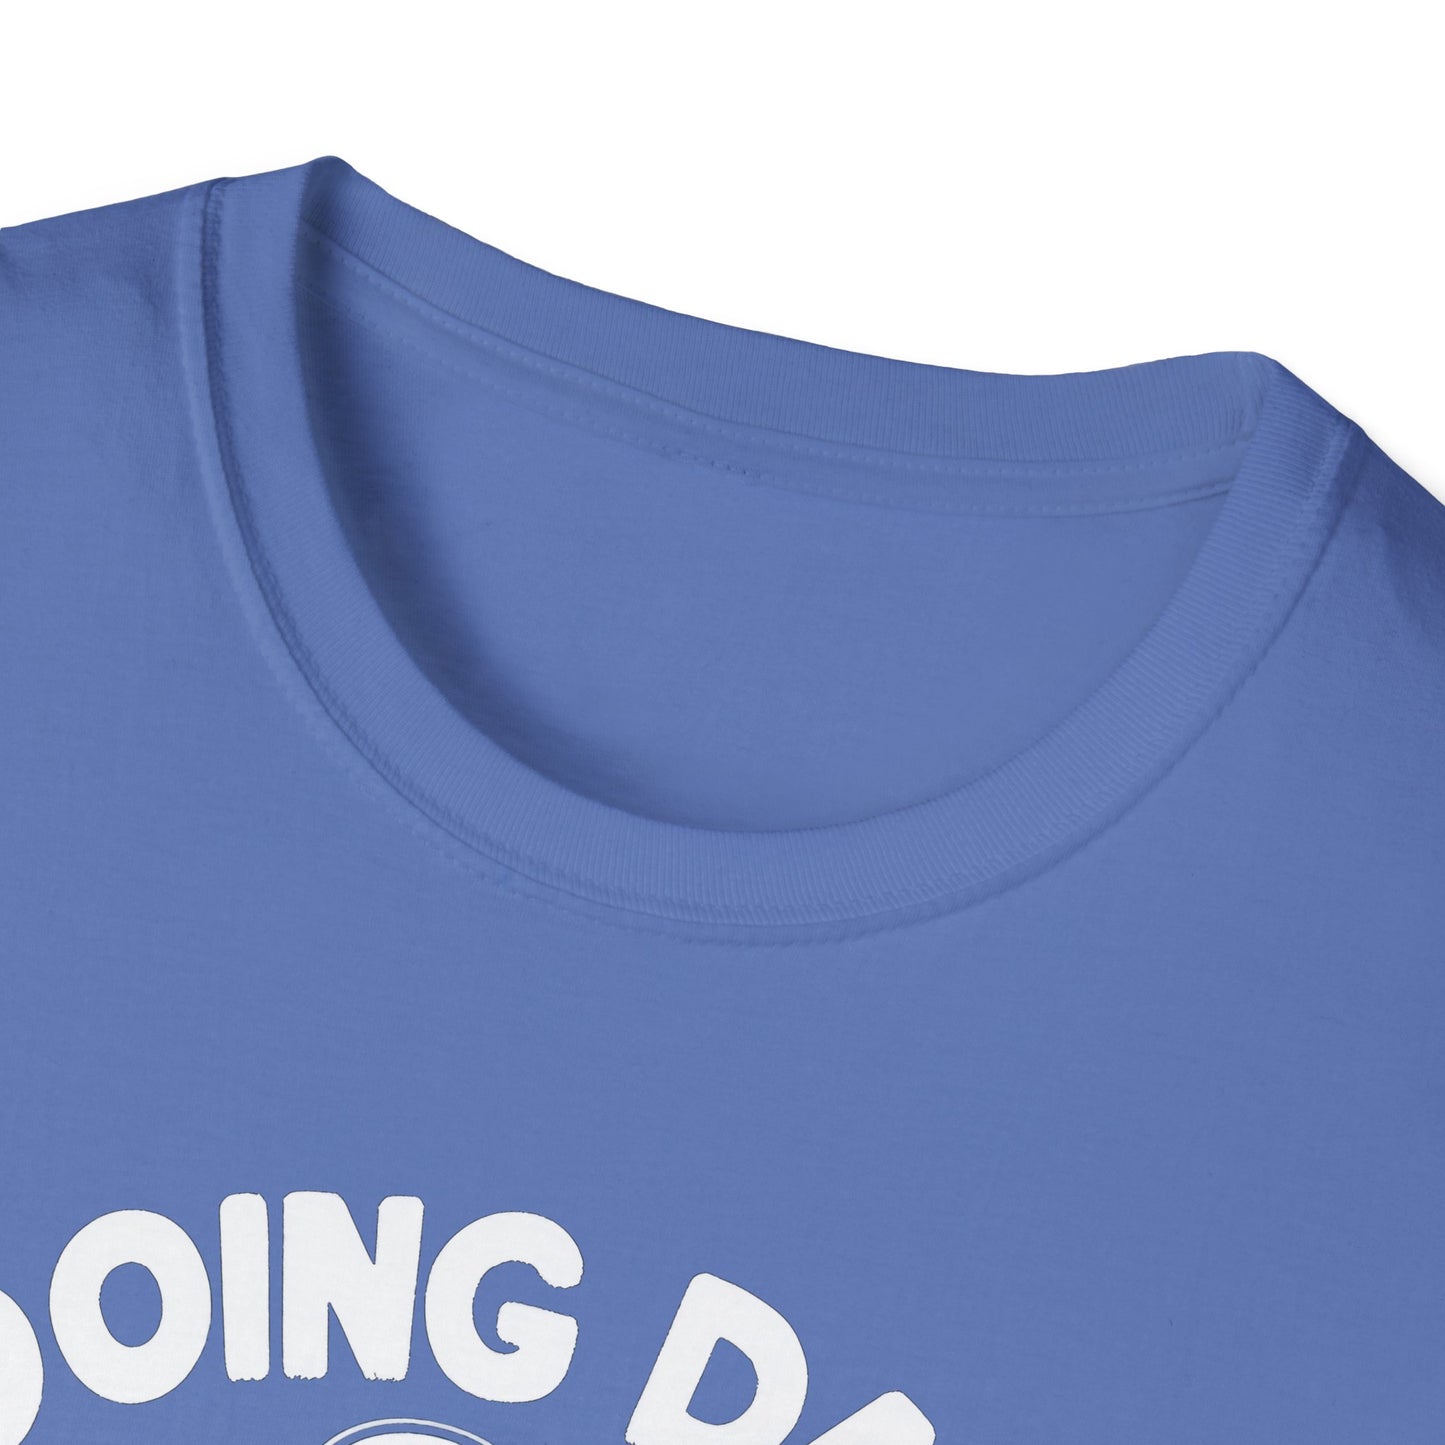 Get trendy with "Doing Dad Shit" Unisex Softstyle T-Shirt - T-Shirt available at Good Gift Company. Grab yours for $18 today!